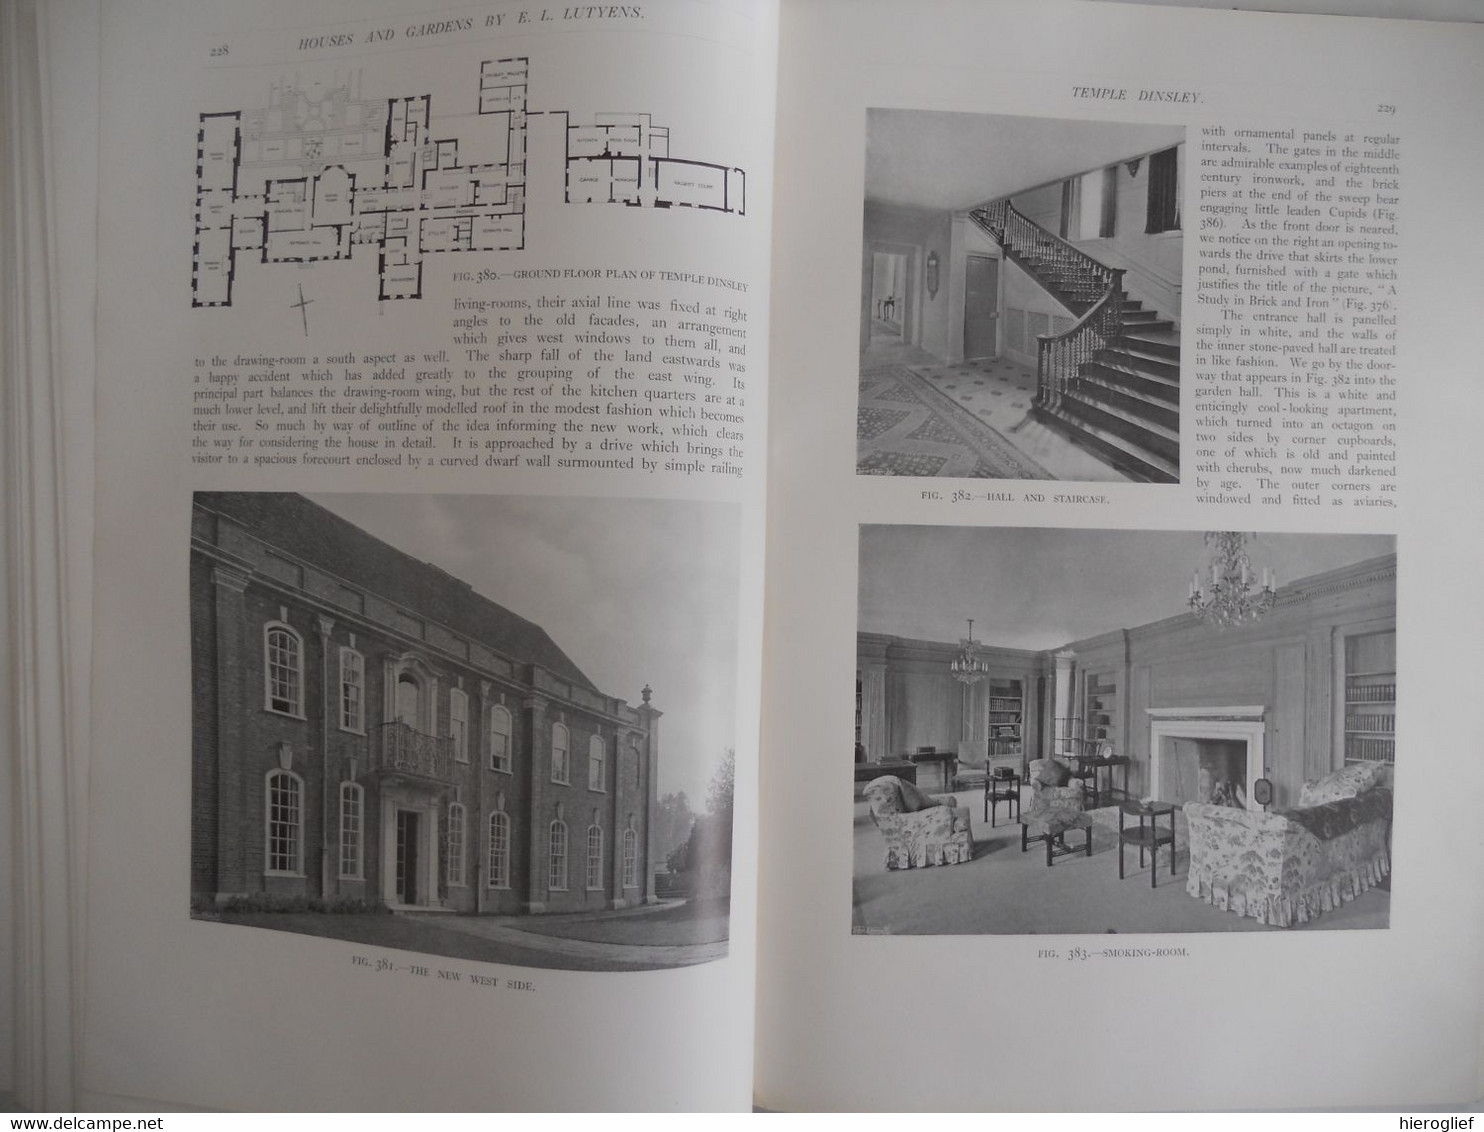 HOUSES AND GARDENS BY E.L. LUTYEN decribedb&v criticised by Lawrence Weaver 1913 london